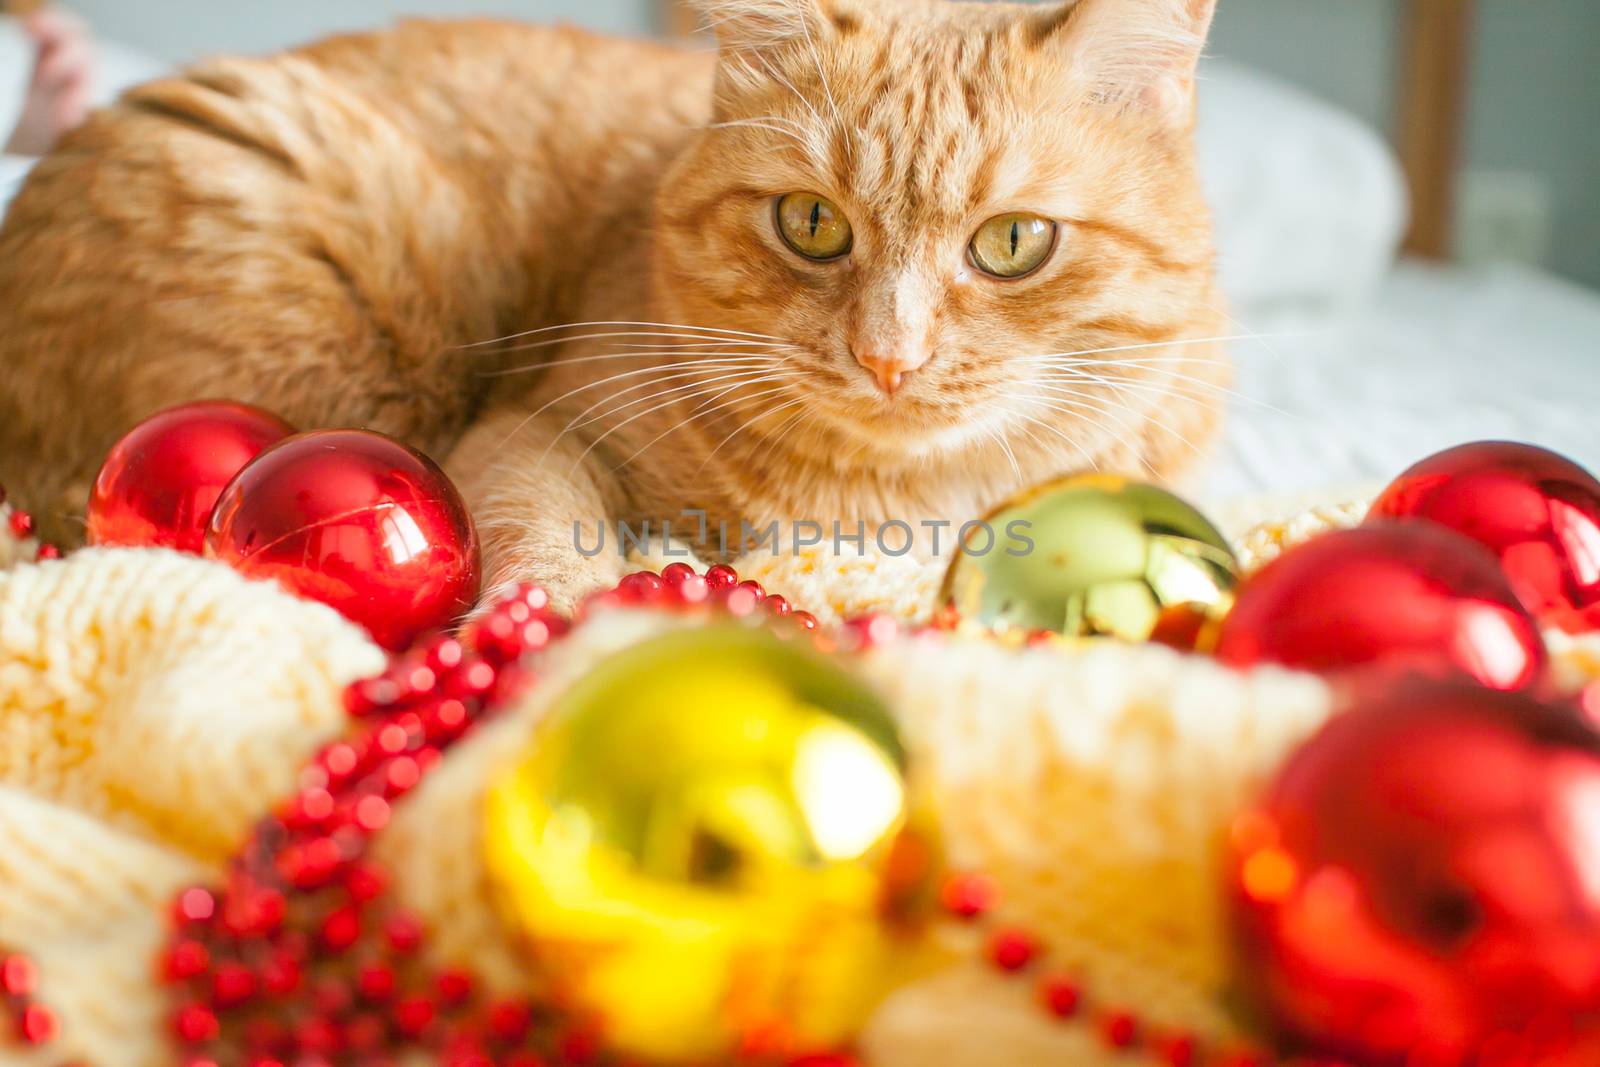 A fat lazy ginger cat lies on a knitted yellow blanket with New Year's toys: gold and red balls. by malyshkamju